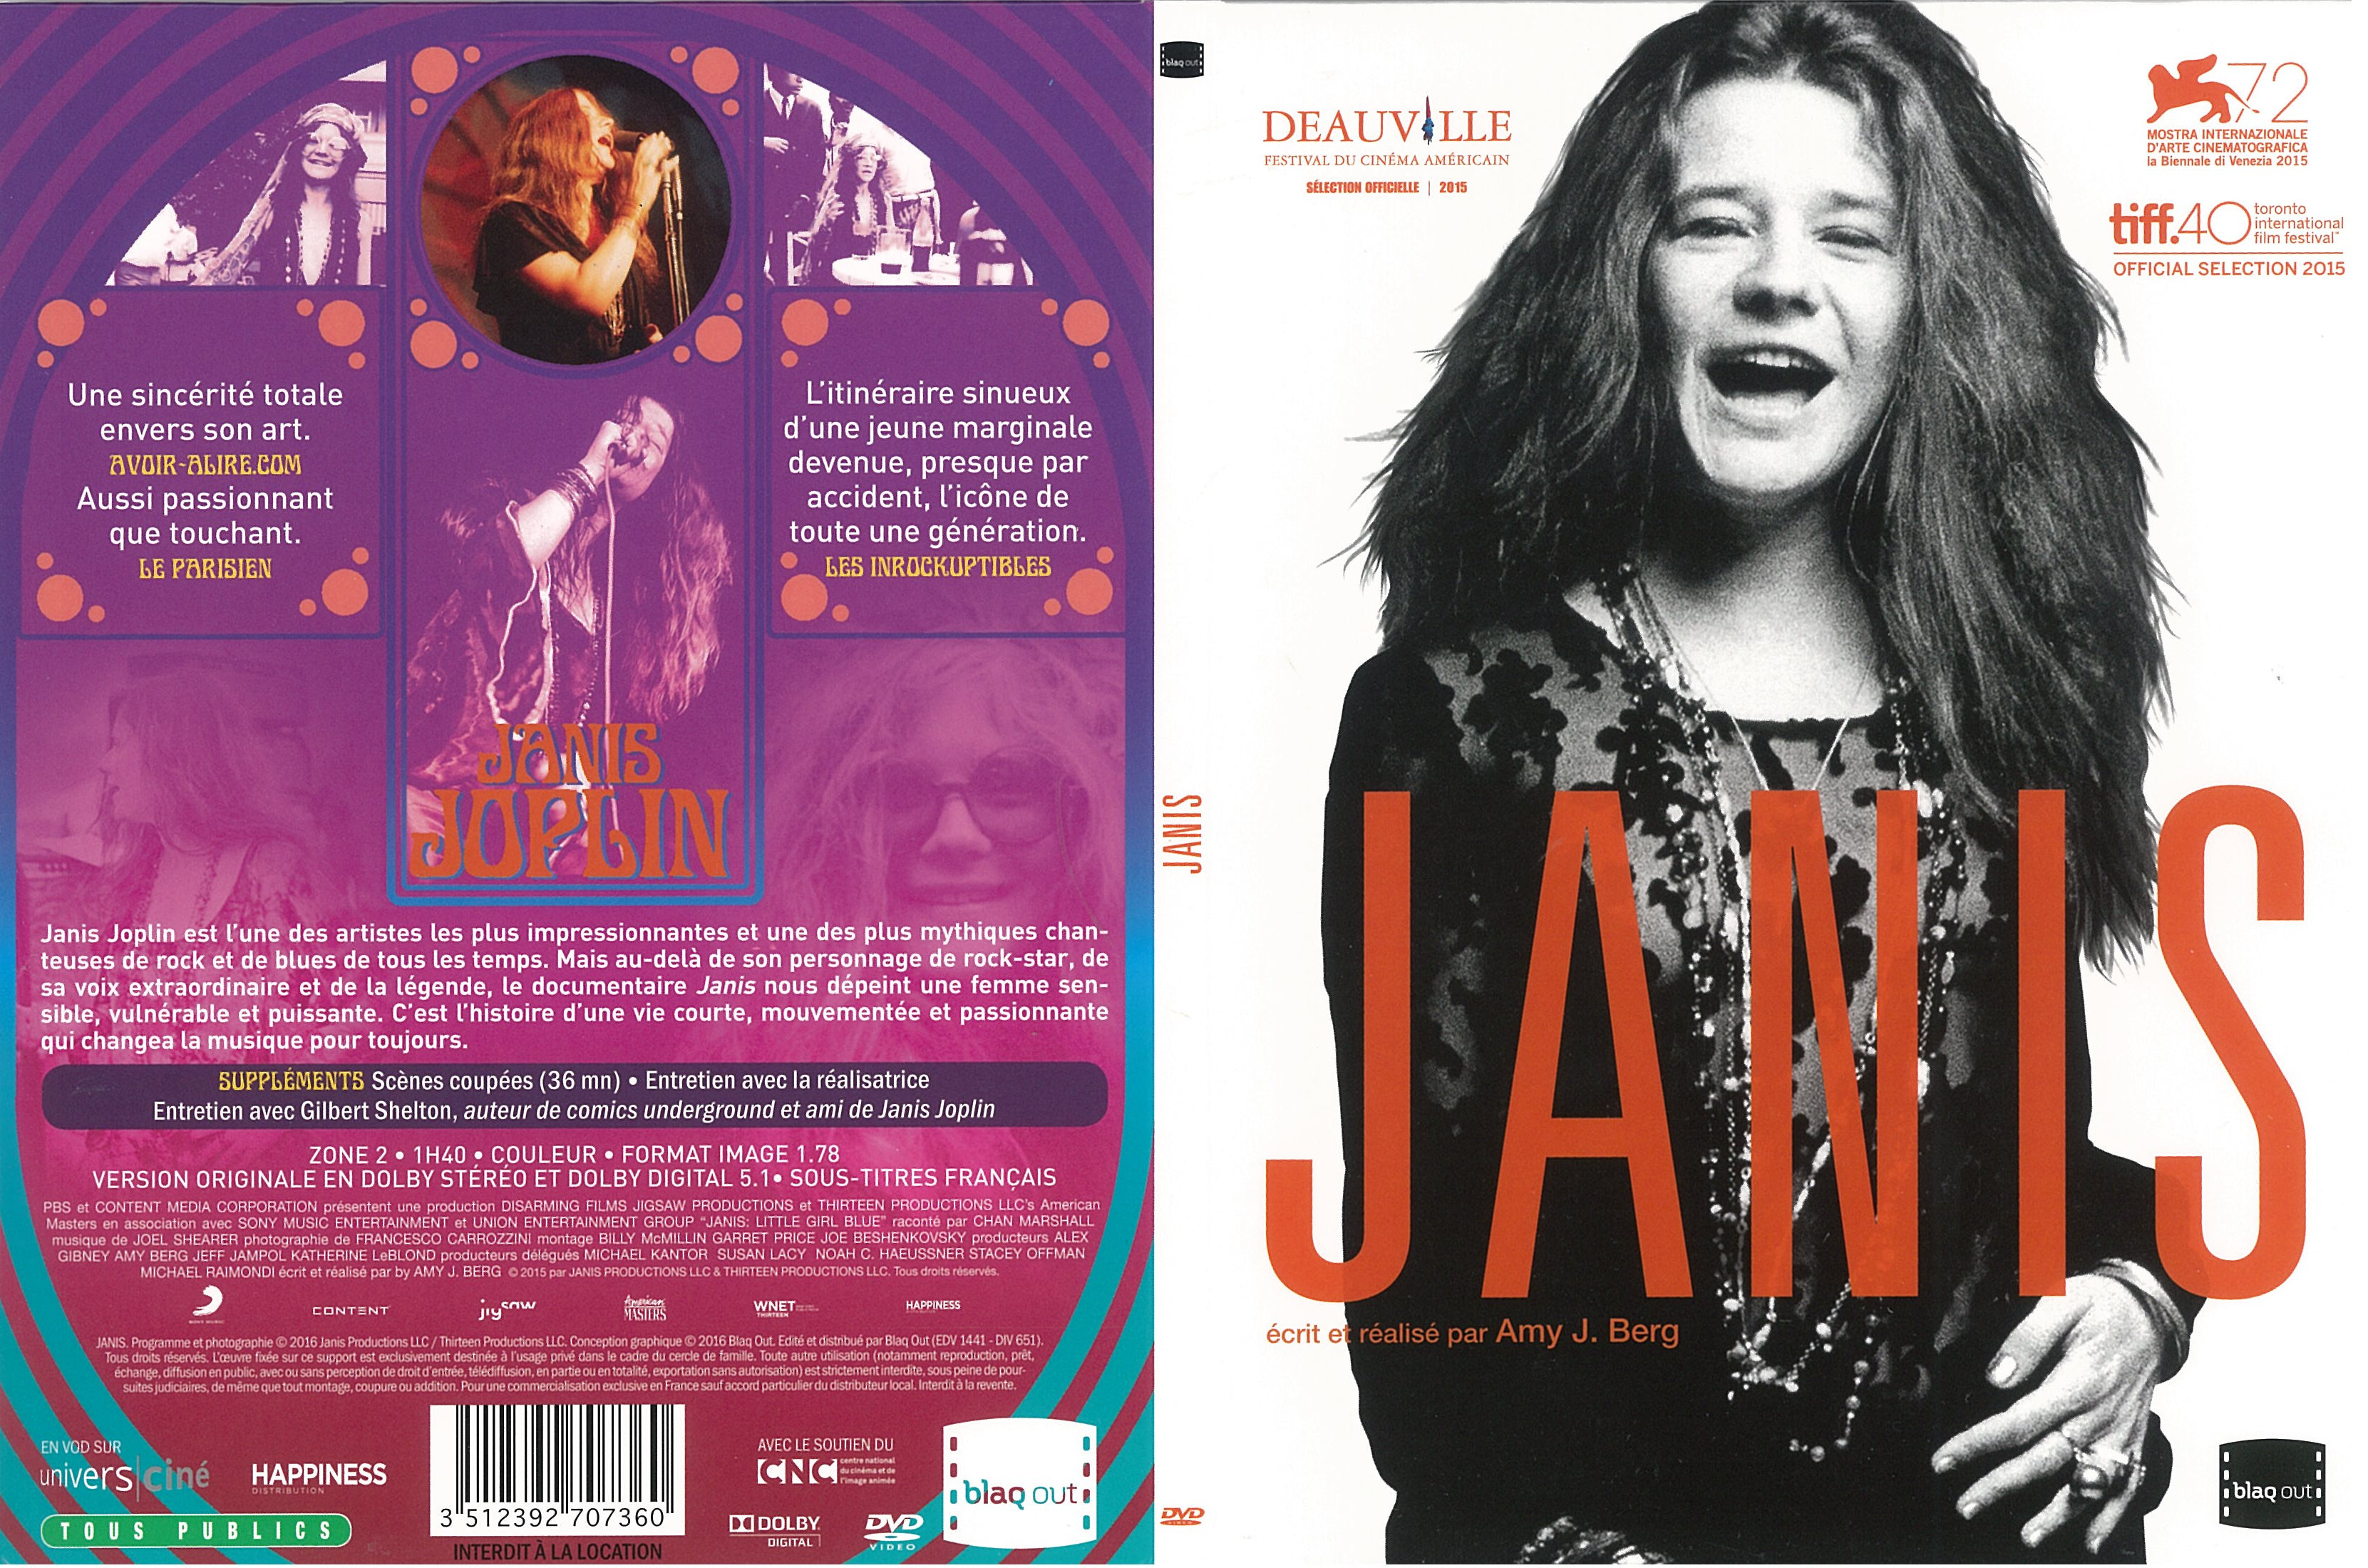 Jaquette DVD Janis